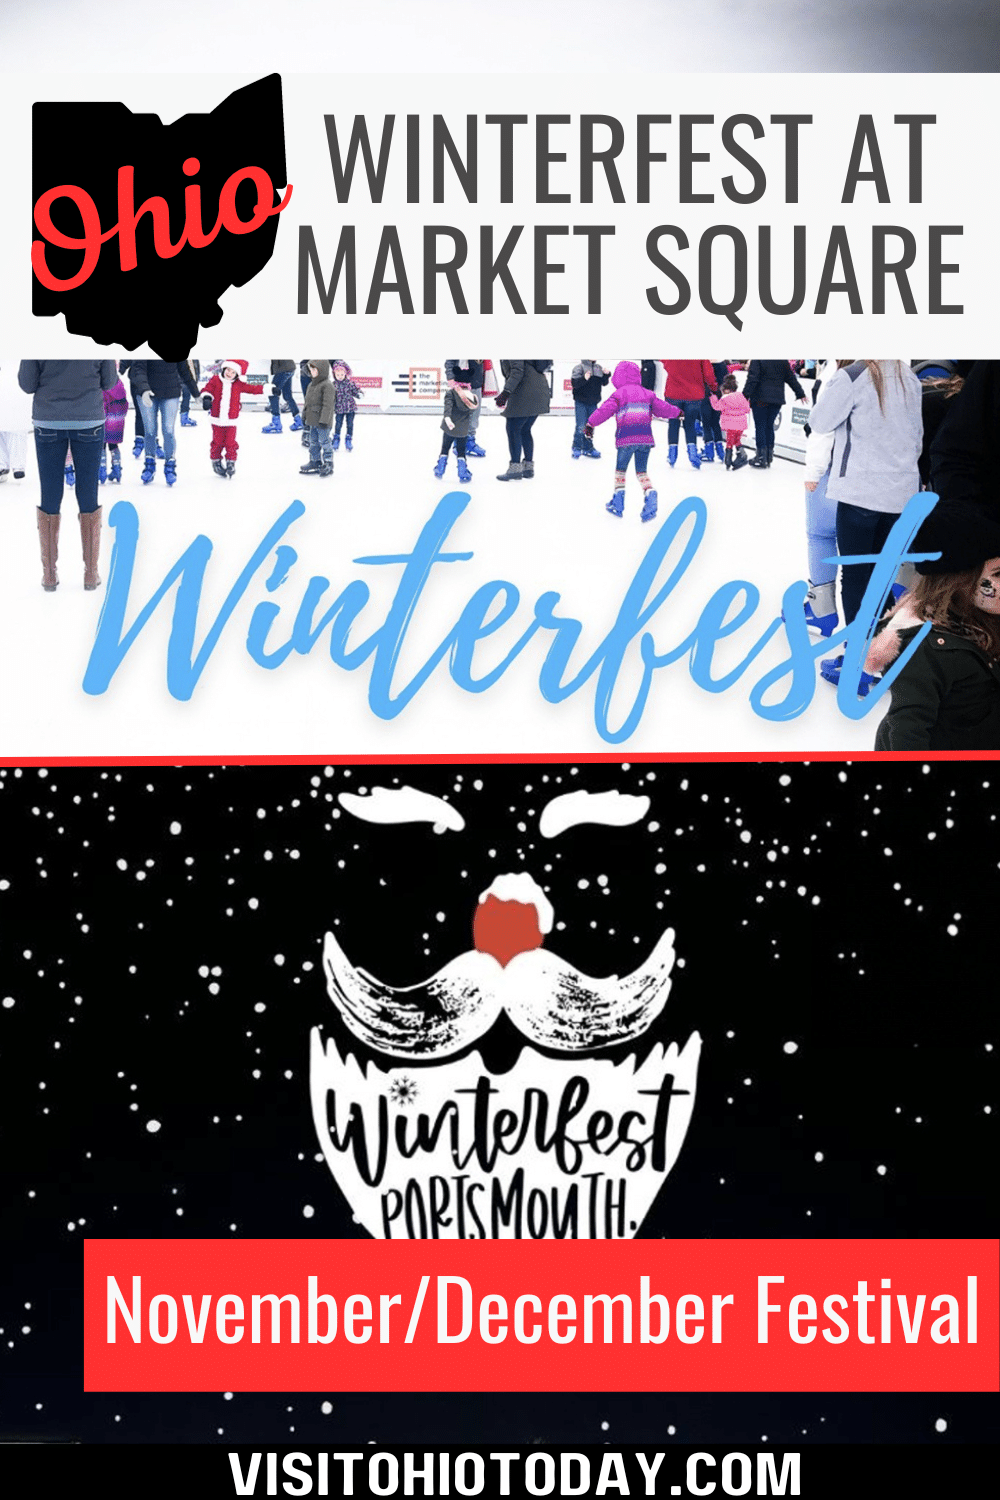 The Winterfest at Market Square is at Boneyfiddle’s Market Square, Portsmouth, Ohio from mid-November to the end of December. Visit this wonderland of lights and family fun.